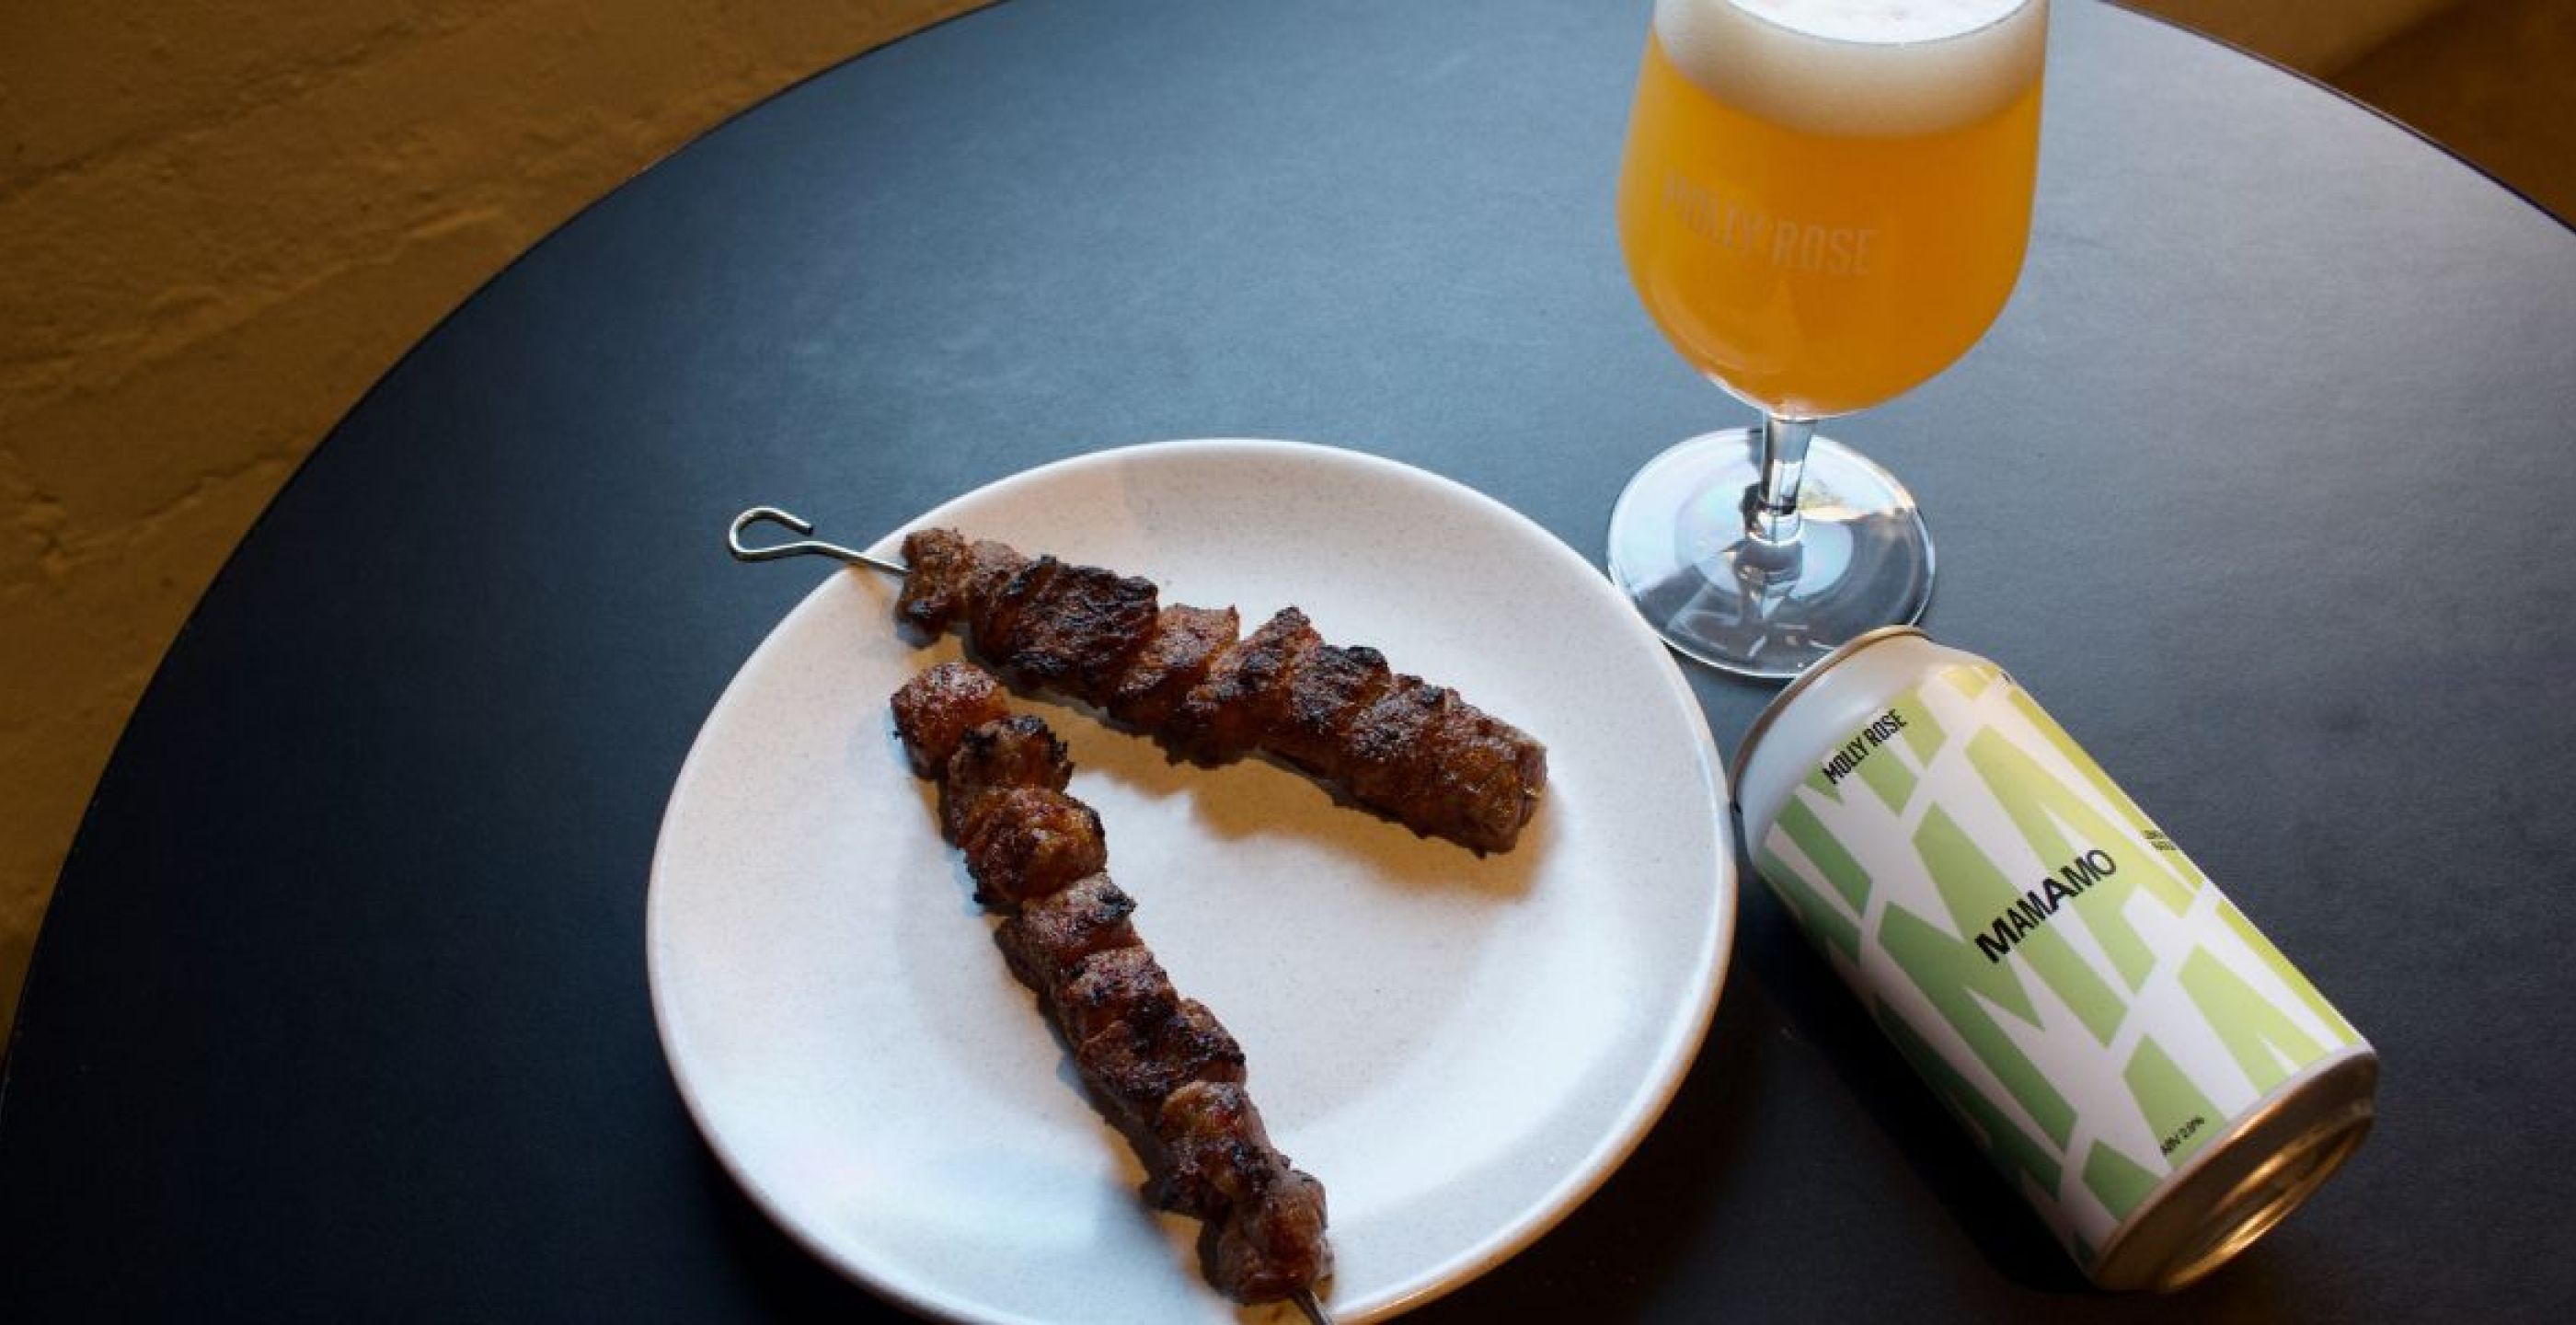 The Matchmakers: Pairing Food With Radlers